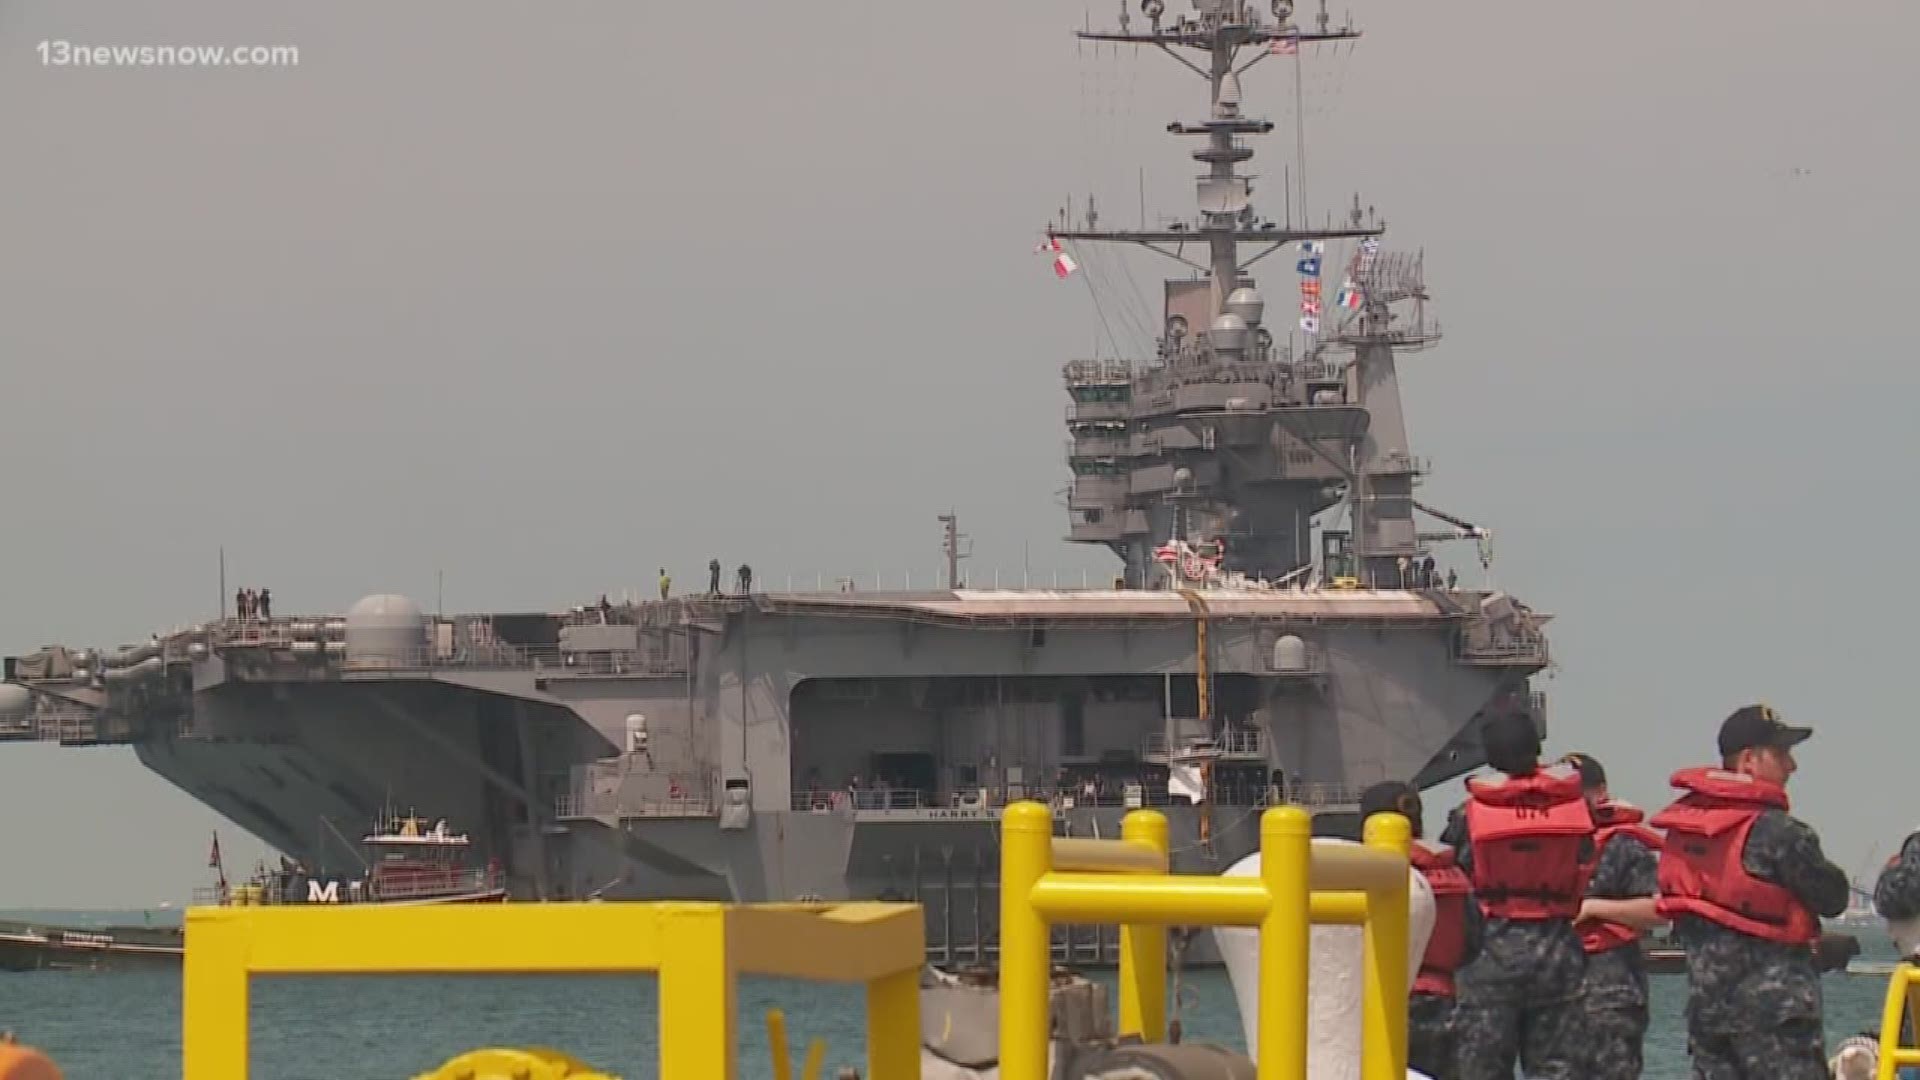 The proposed 2020 Defense budget includes retiring the USS Harry S. Truman in order to focus on future capabilities which would cost Newport News Shipbuilding billions of dollars.